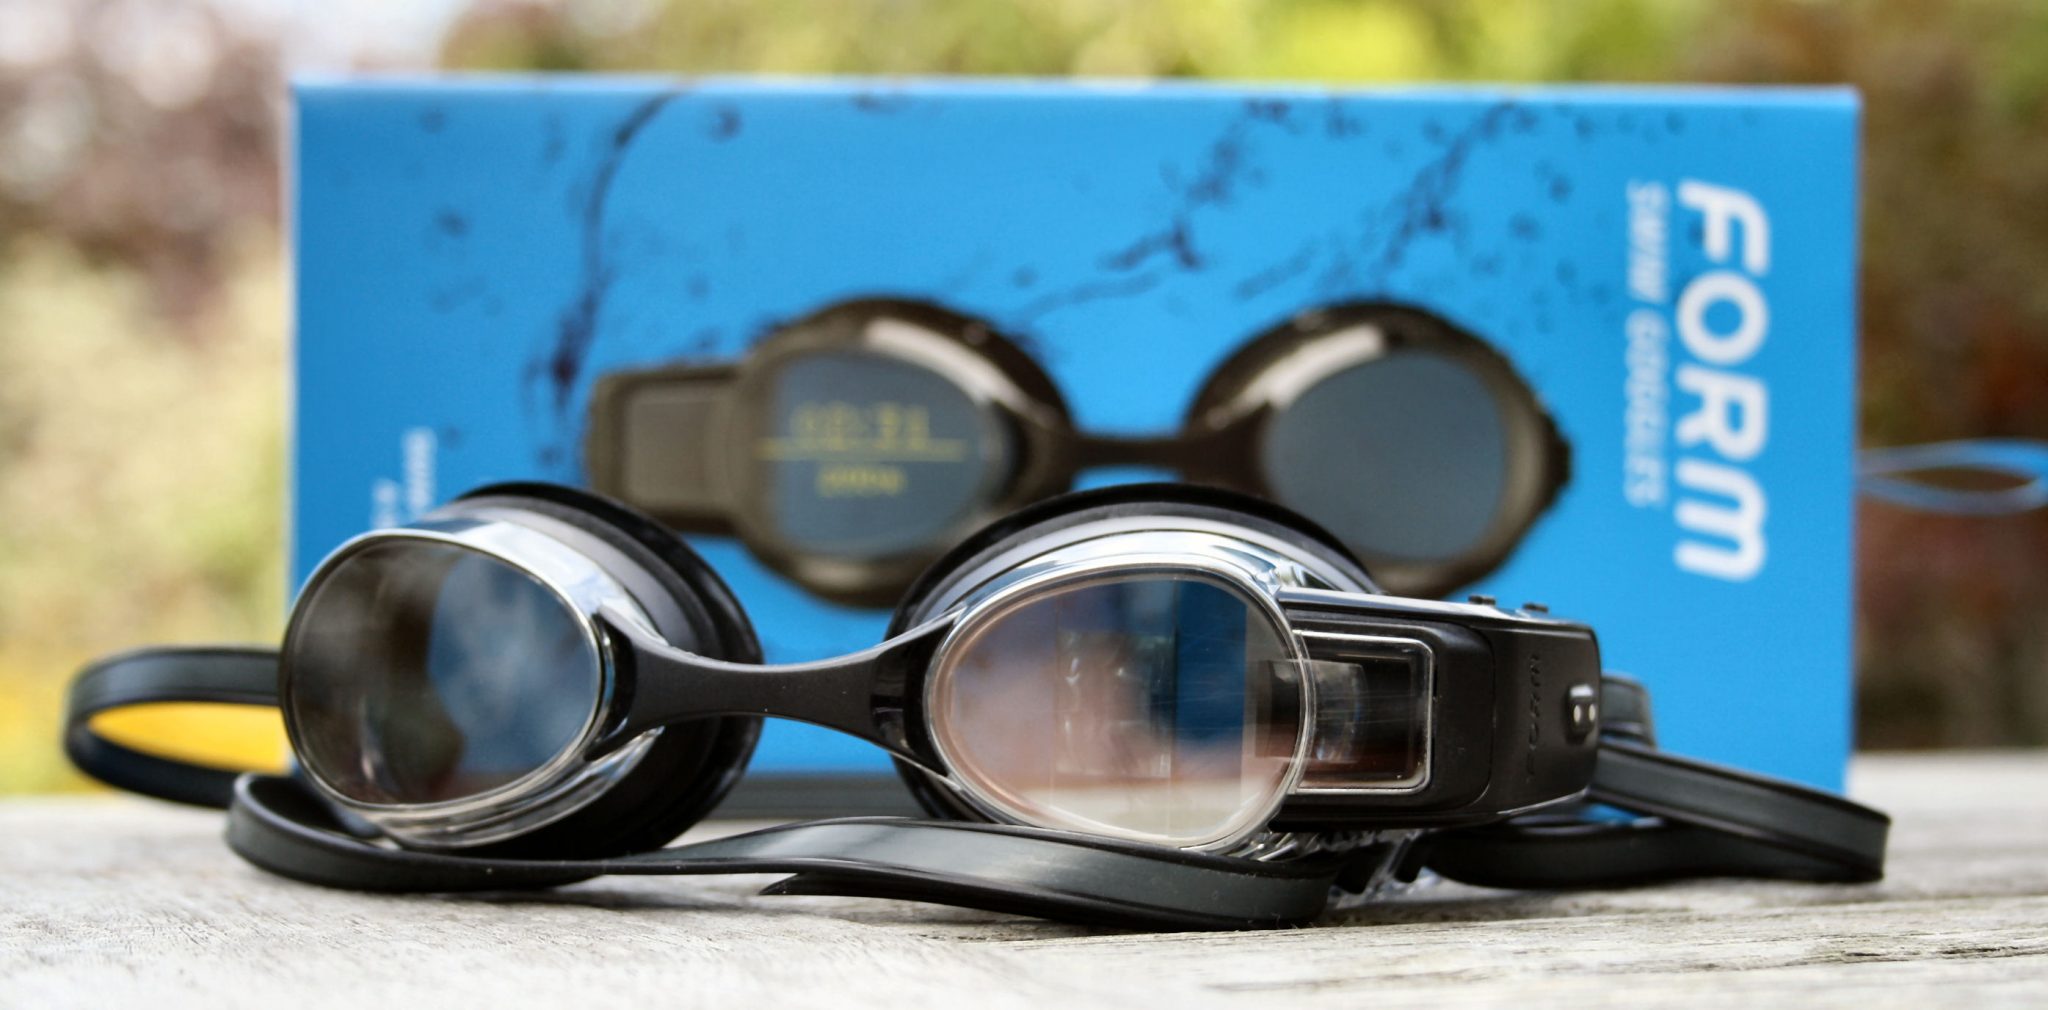 FORM Swim Goggles Review Specifications